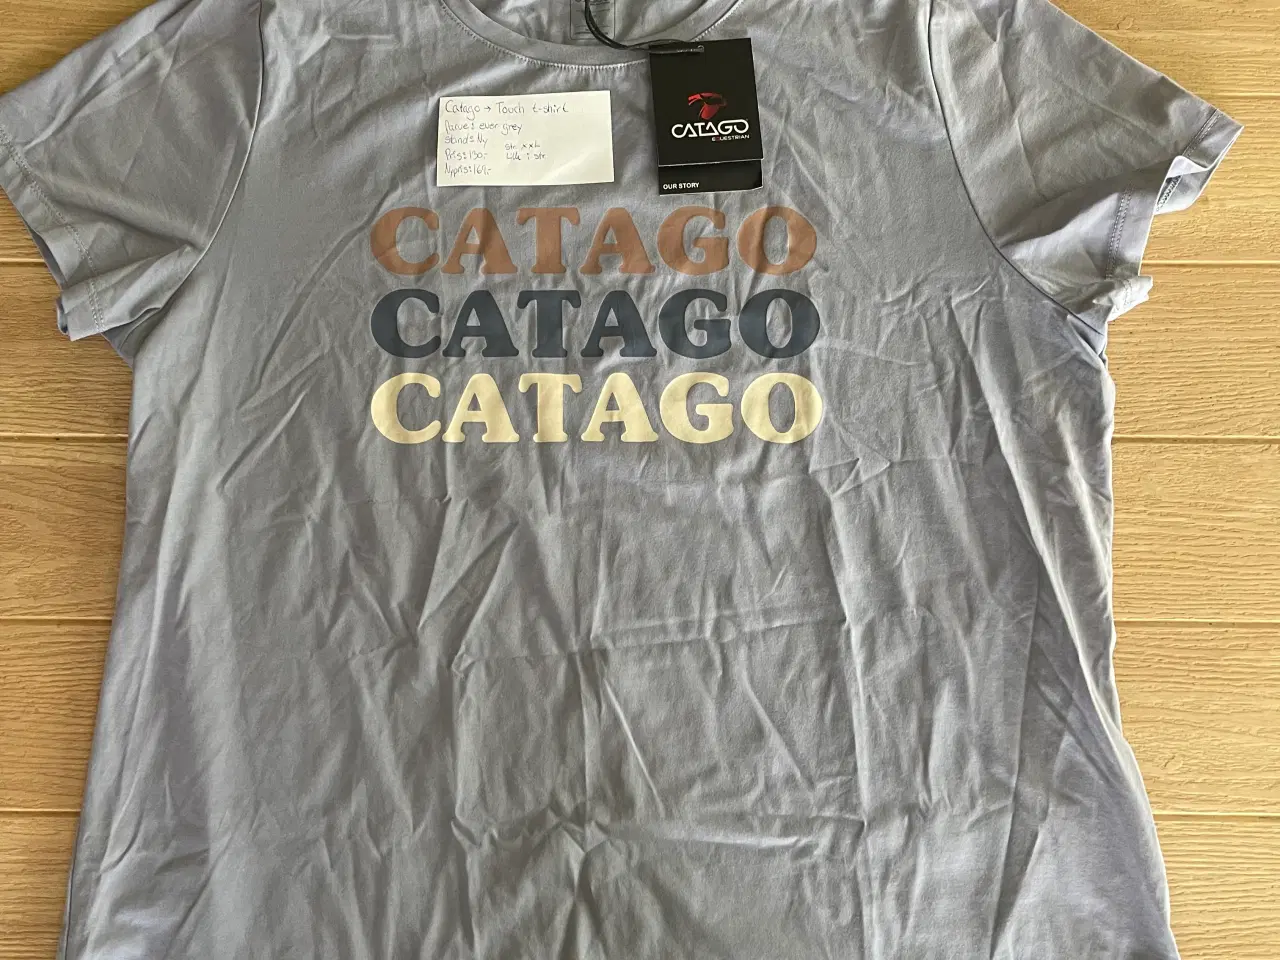 Billede 1 - Helt ny CATAGO touch t-shirt